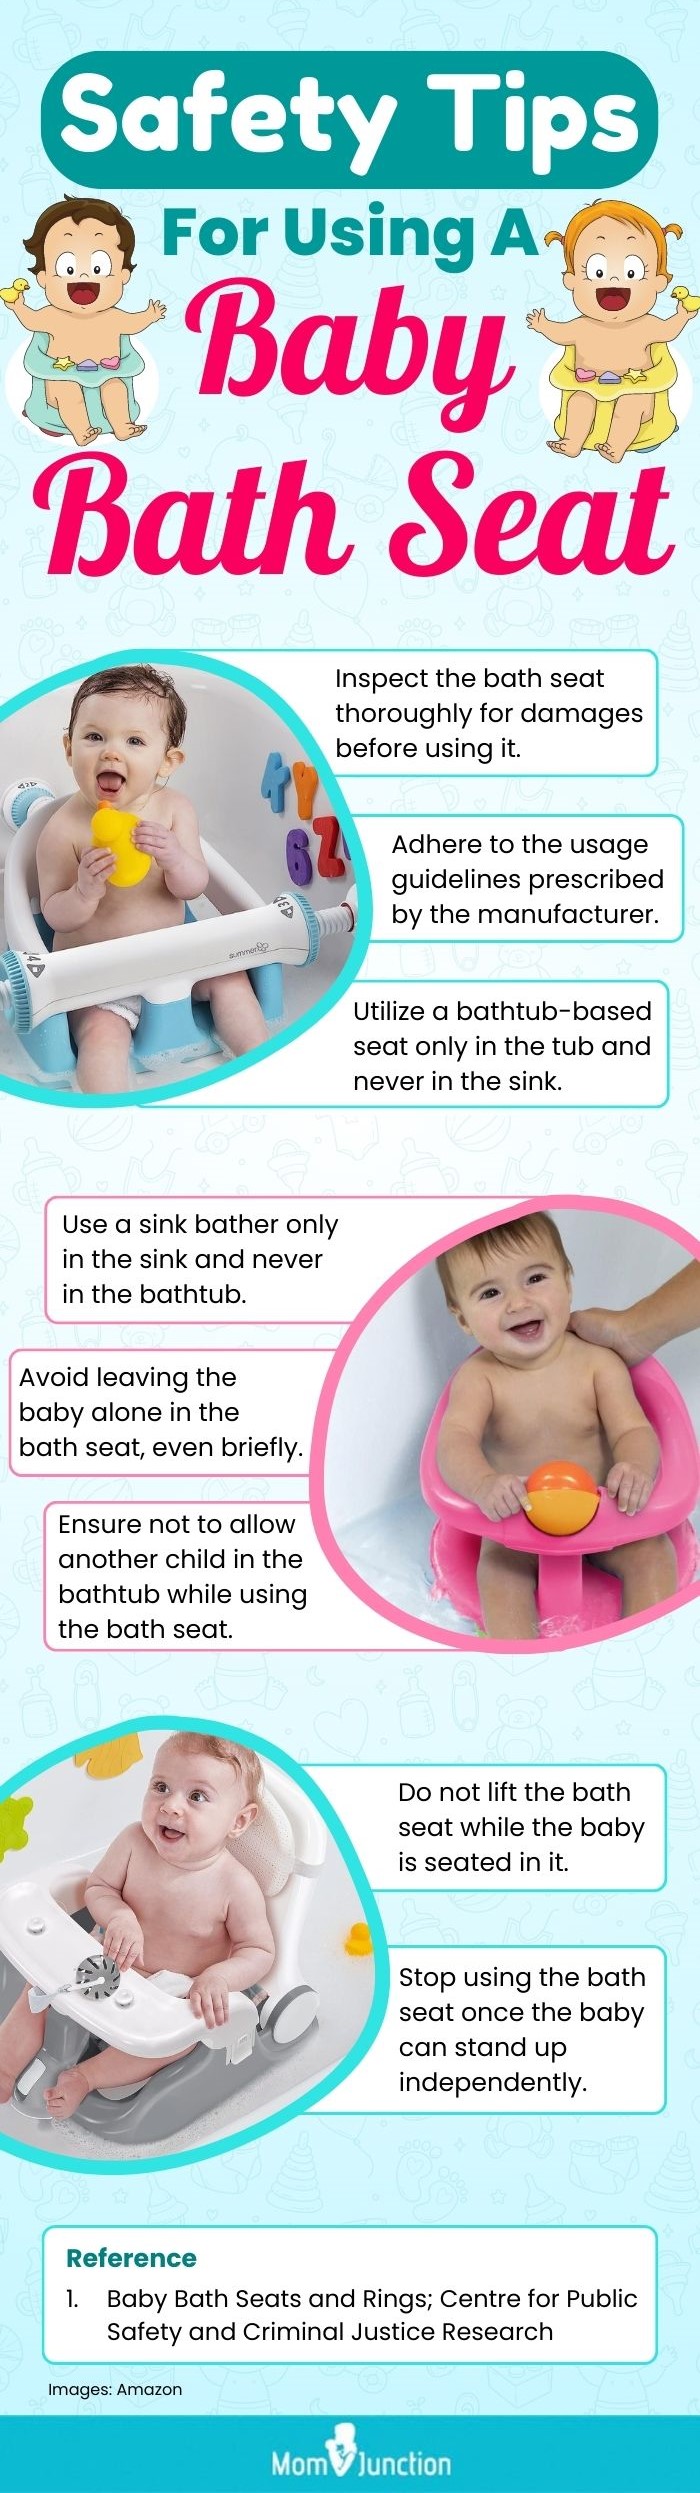 https://cdn2.momjunction.com/wp-content/uploads/2021/09/Safety-Tips-For-Using-A-Baby-Bath-Seat.jpg